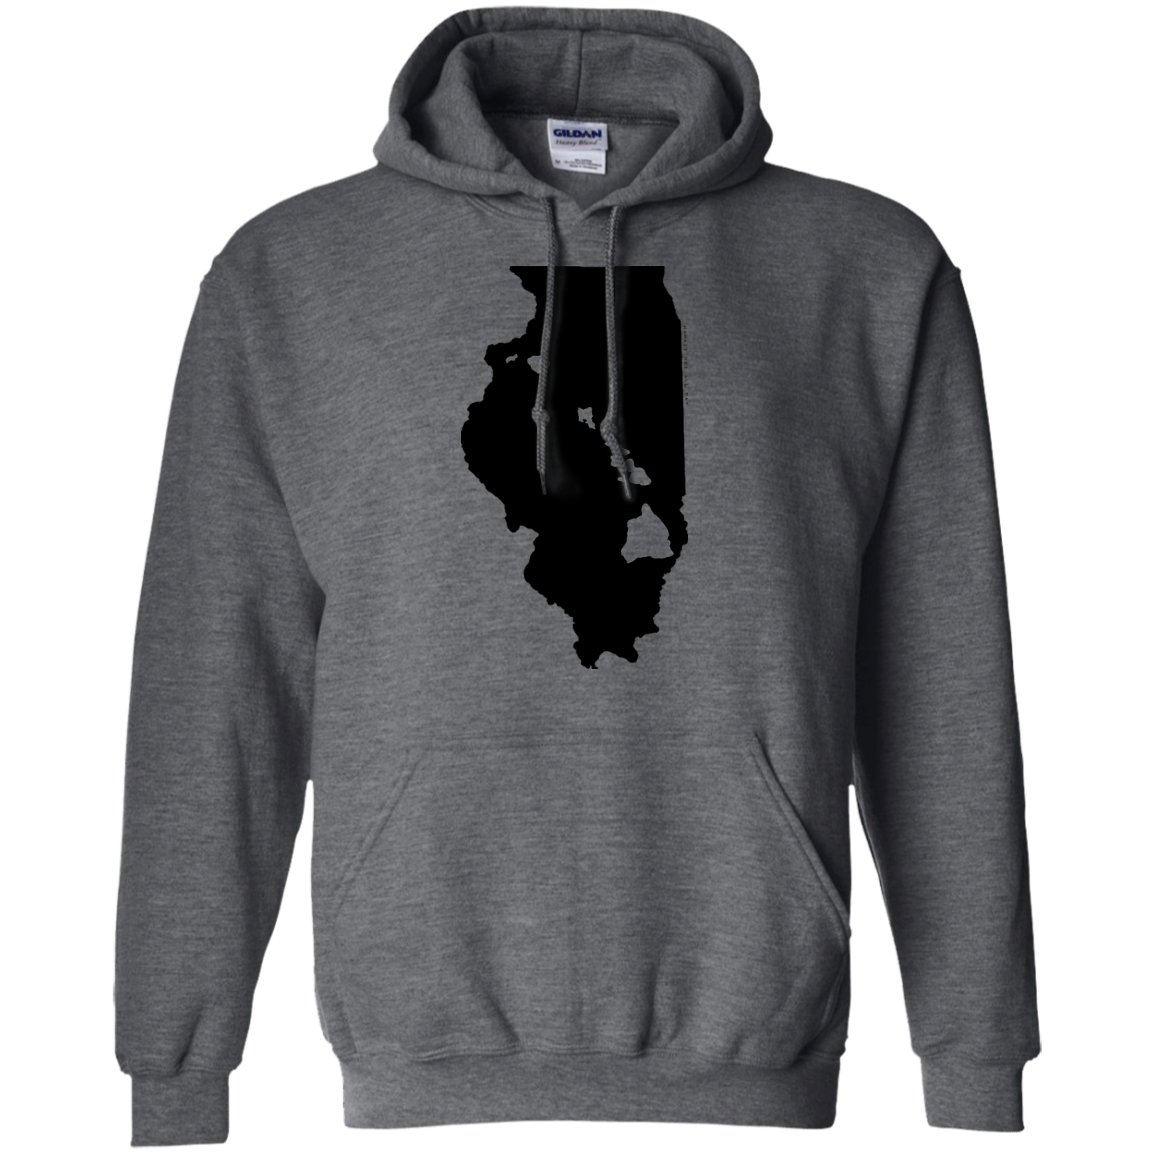 Living in Illinois with Hawaii Roots Pullover Hoodie 8 oz., Sweatshirts, Hawaii Nei All Day